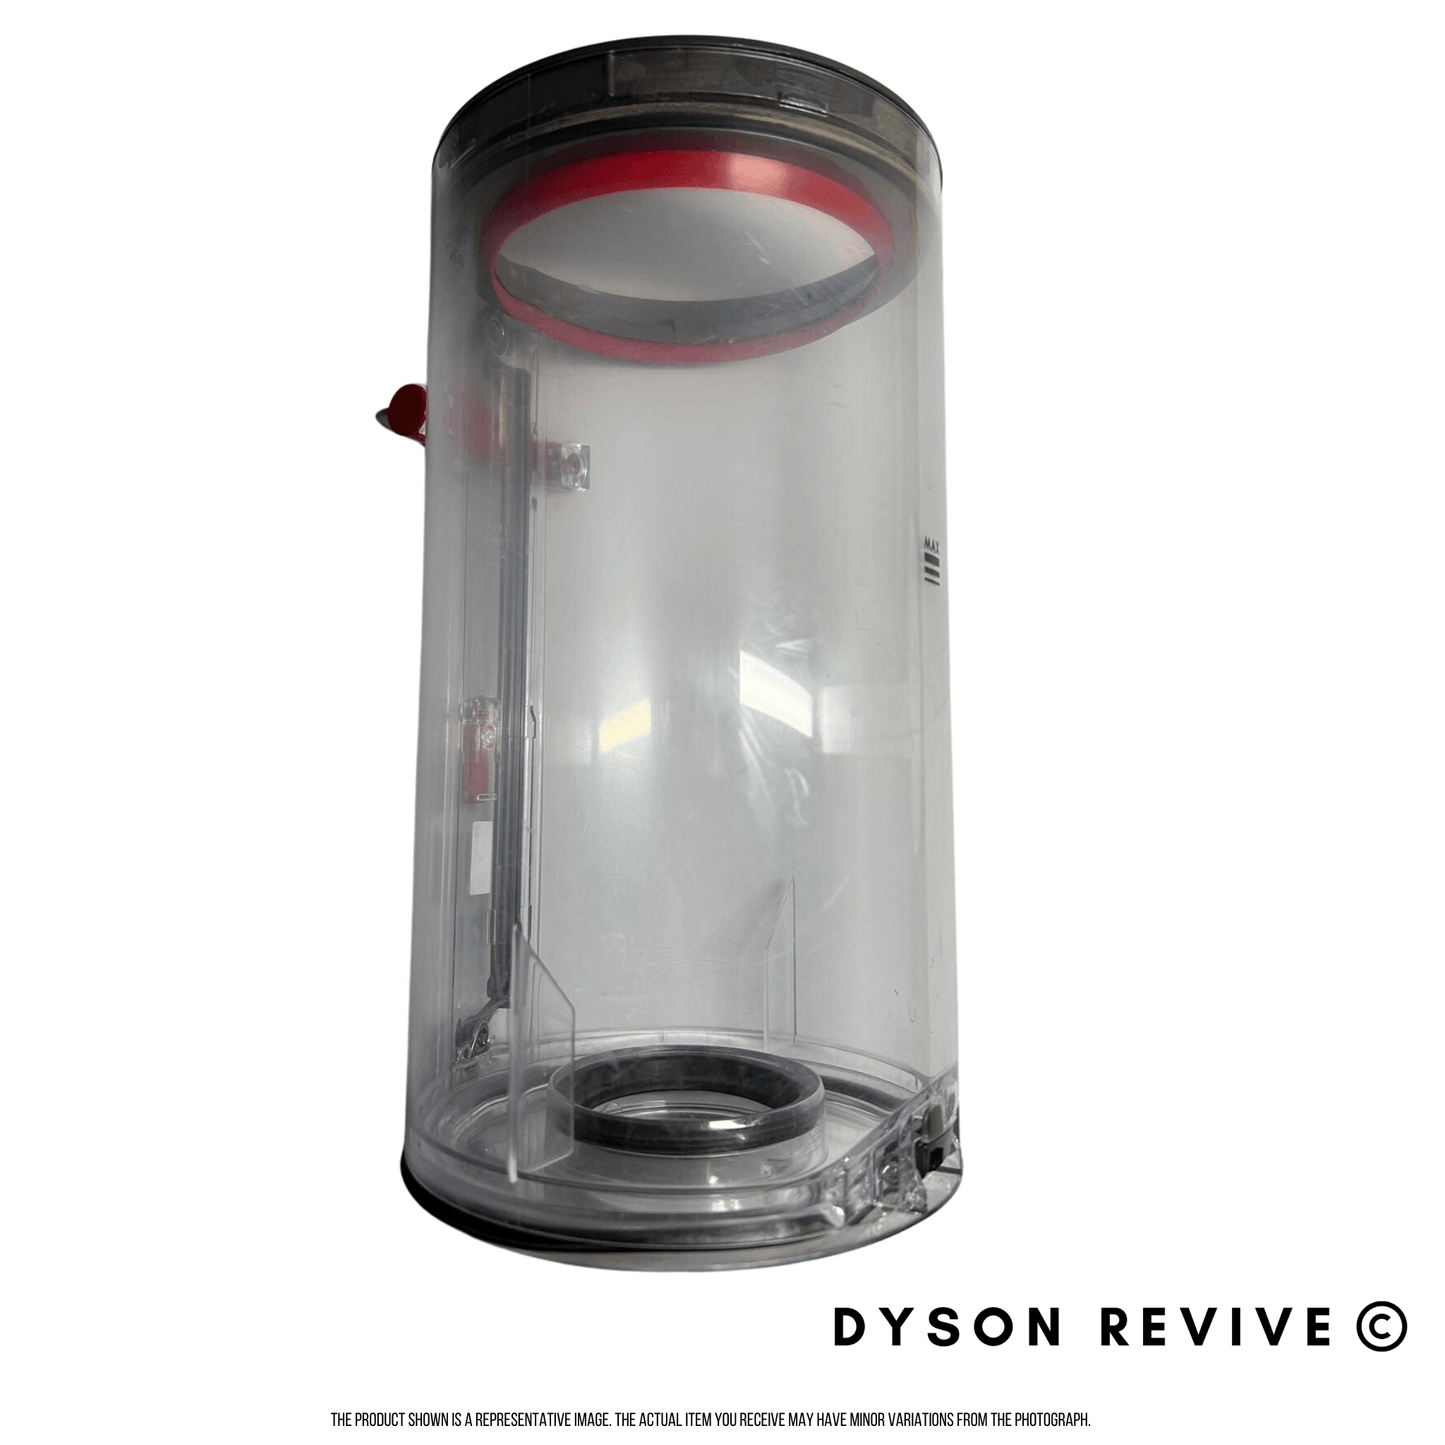 Genuine Dyson Refurbished Dustbin Canister for Dyson V11 Outsize - Dyson Revive